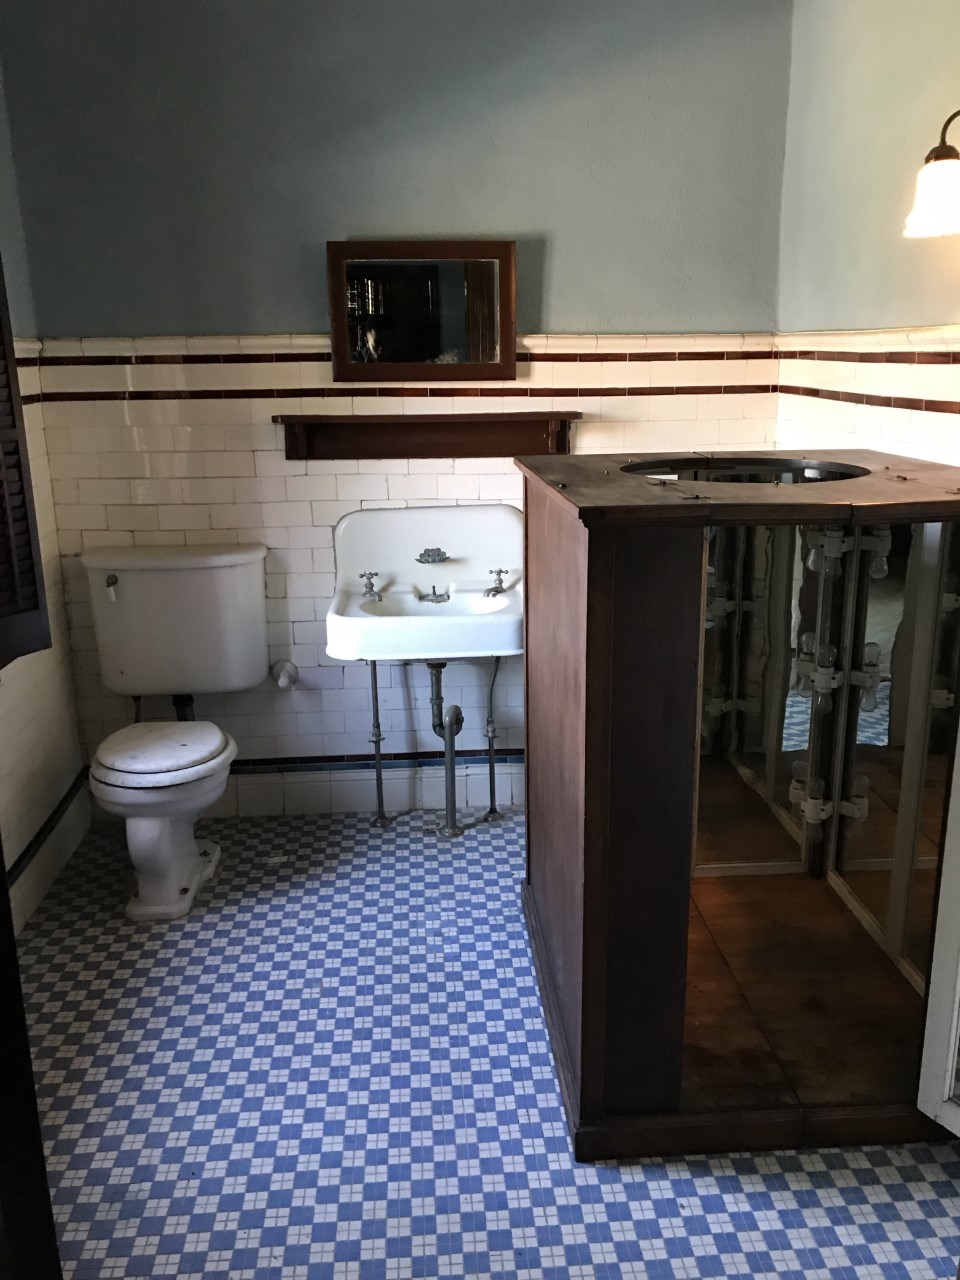 Entire view of Dr. Washington's bathroom with the original fixtures. There is a toilet, sink, mirror, a light, and a sauna.